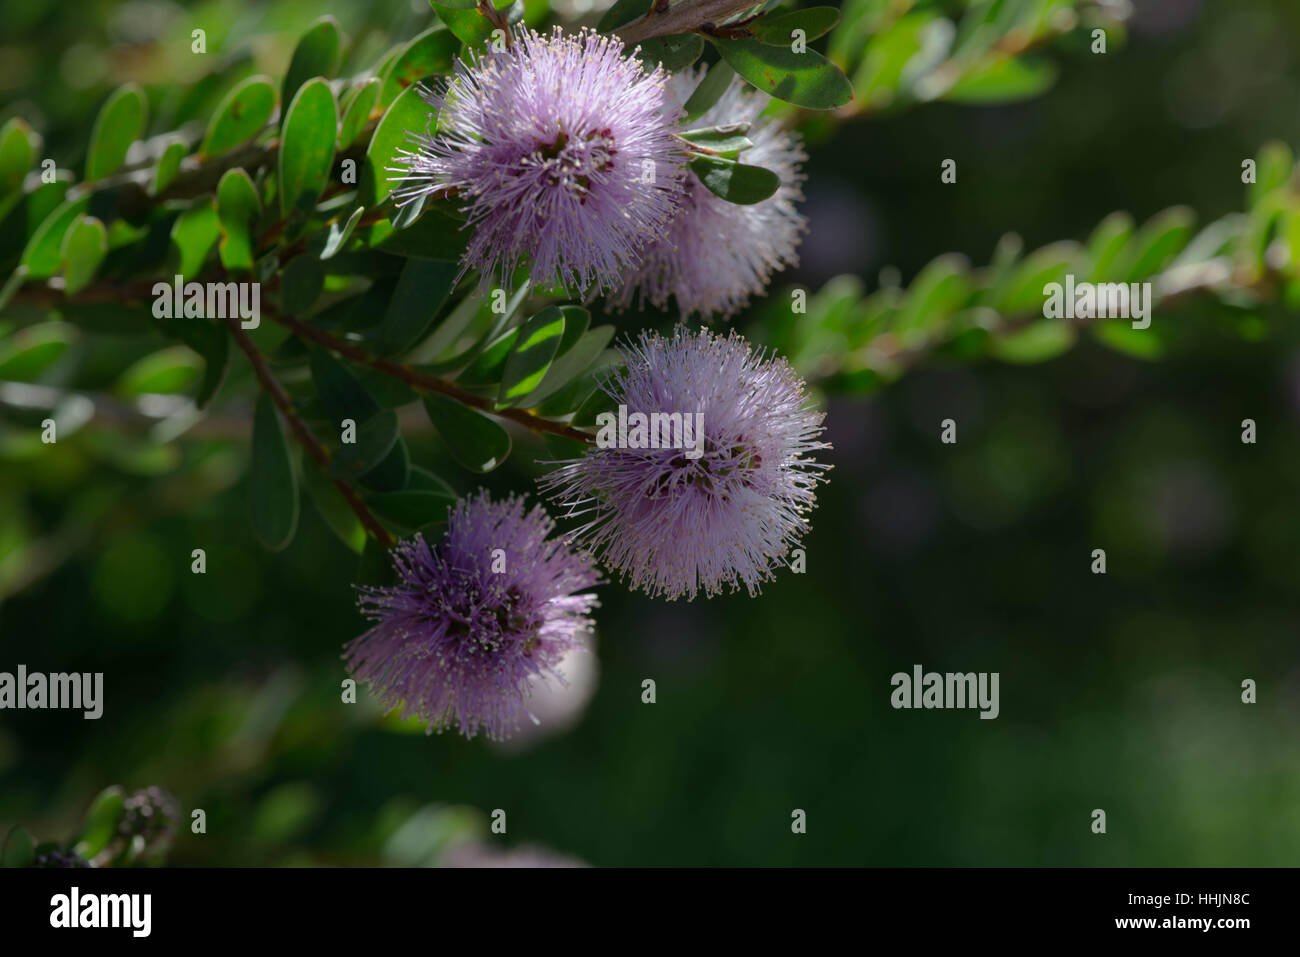 Blossom of the Melaucula Nesophilia, commonly known as Showy Honey Myrtle. Stock Photo